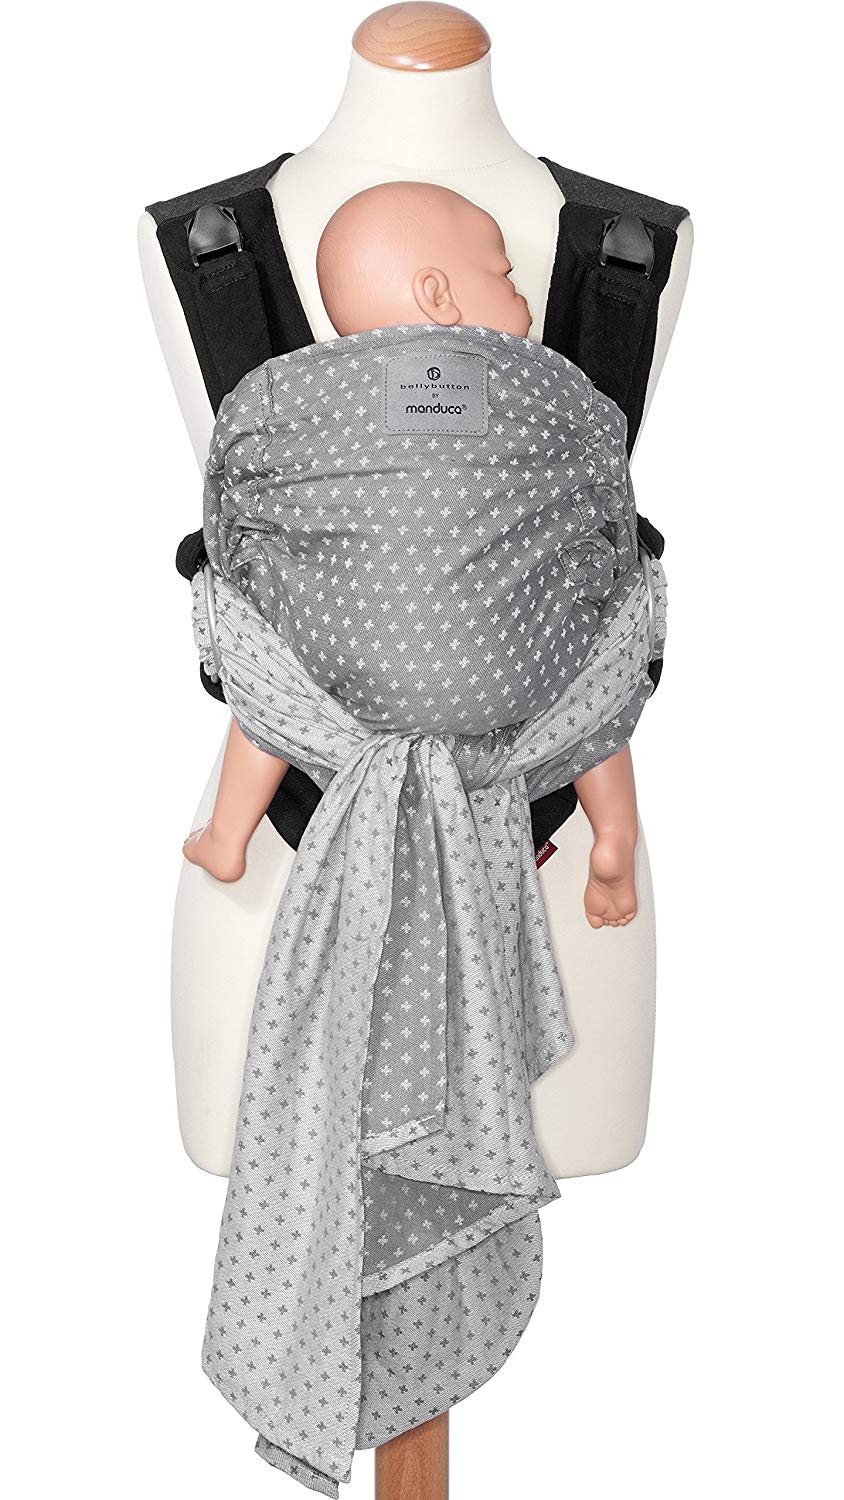 bellybutton by manduca DUO - Innovative Carrying System, Baby Carrier and Sling at the same time, Click & Tie System, Belly Carrier, Removable Waist Belt, for Newborns and Babies up to 15 kg (WildCrosses Grey)